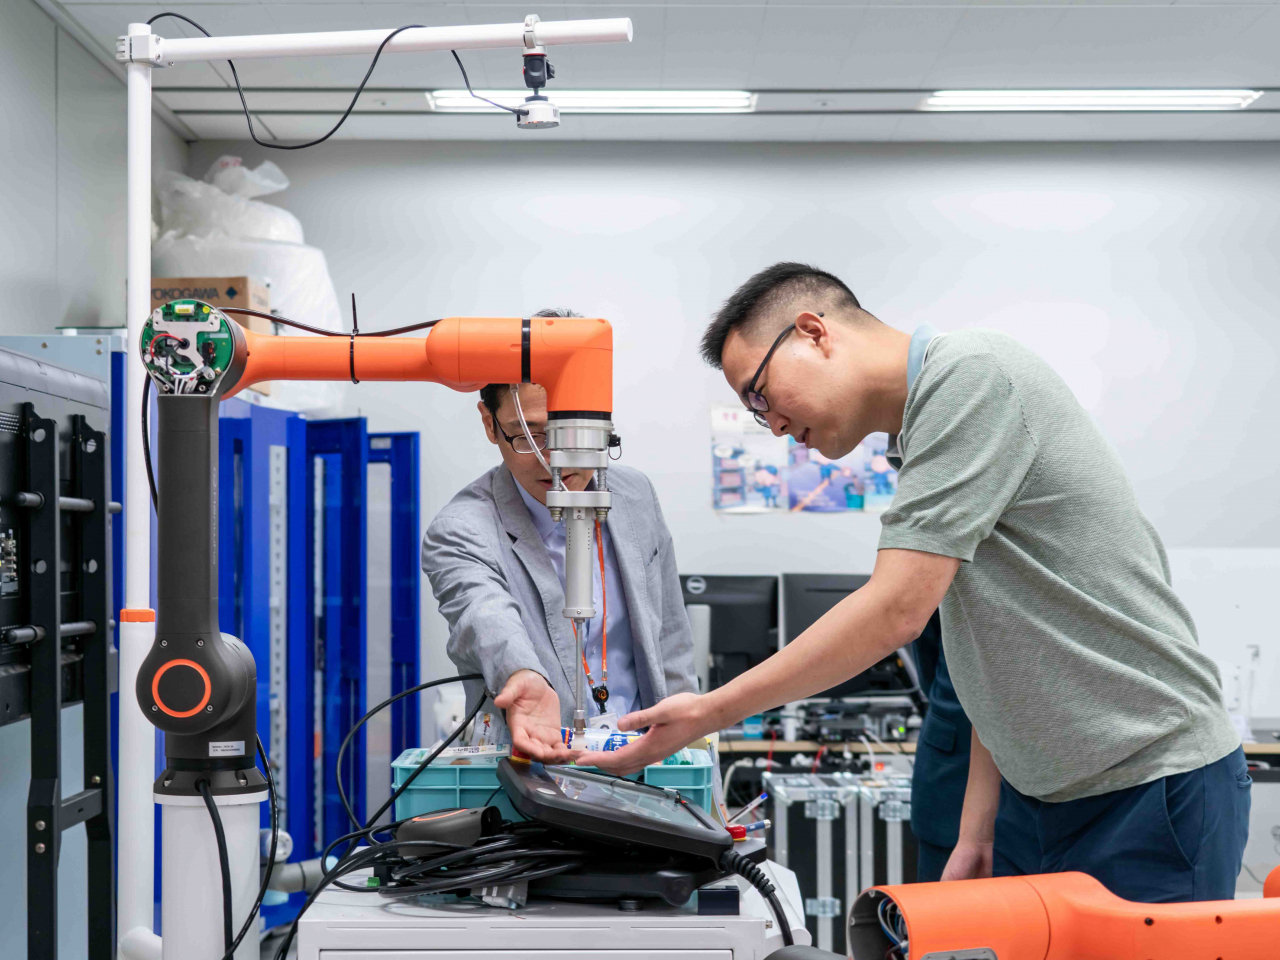 Kim Dong-sun (right), the youngest son of Hanwha Group Chairman Kim Seung-youn and executive director at Hanwha Hotels & Resorts, checks out Hanwha's collaborative robot at the company's future technology lab in Gyeonggi Province in September. (Hanwha Robotics)